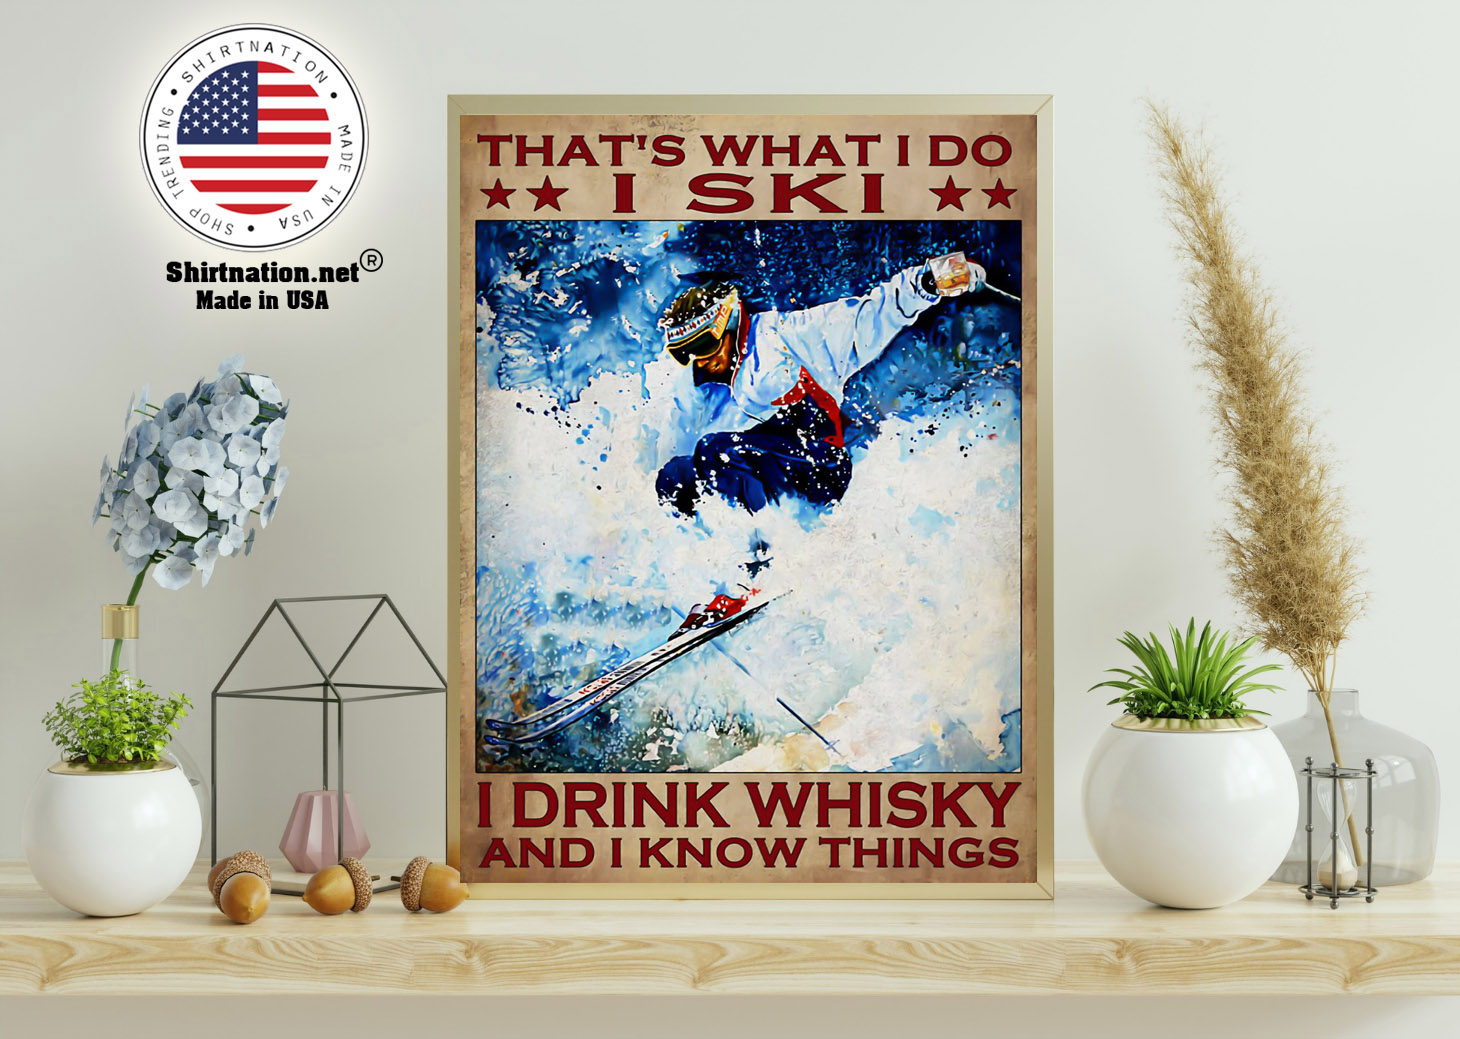 Thats what I do I ski I drink whisky and I know things poster 11